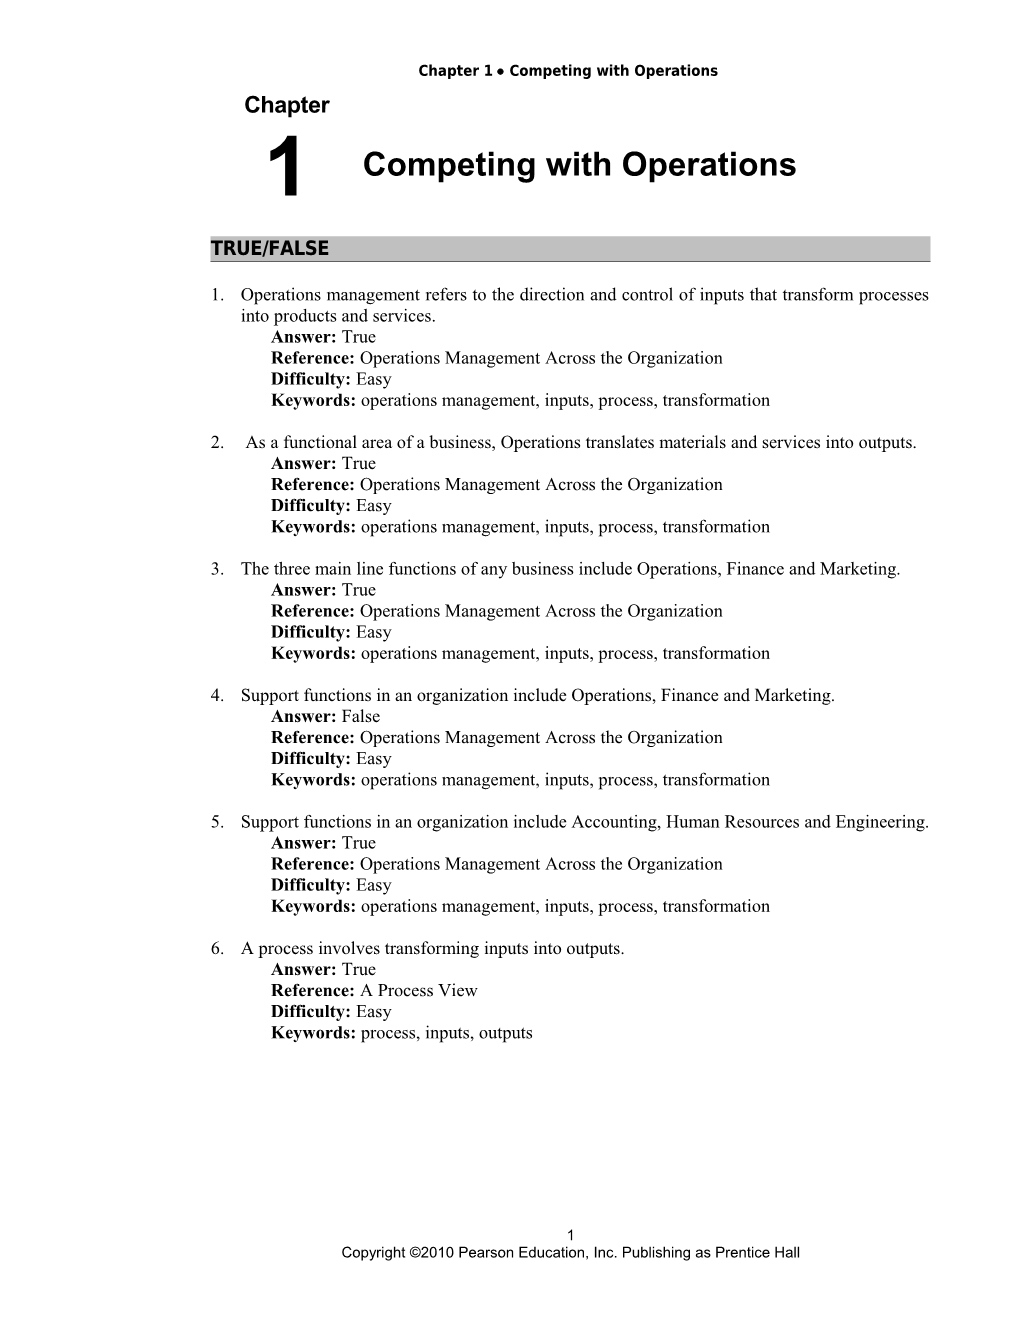 Chapter 1 Competing with Operations